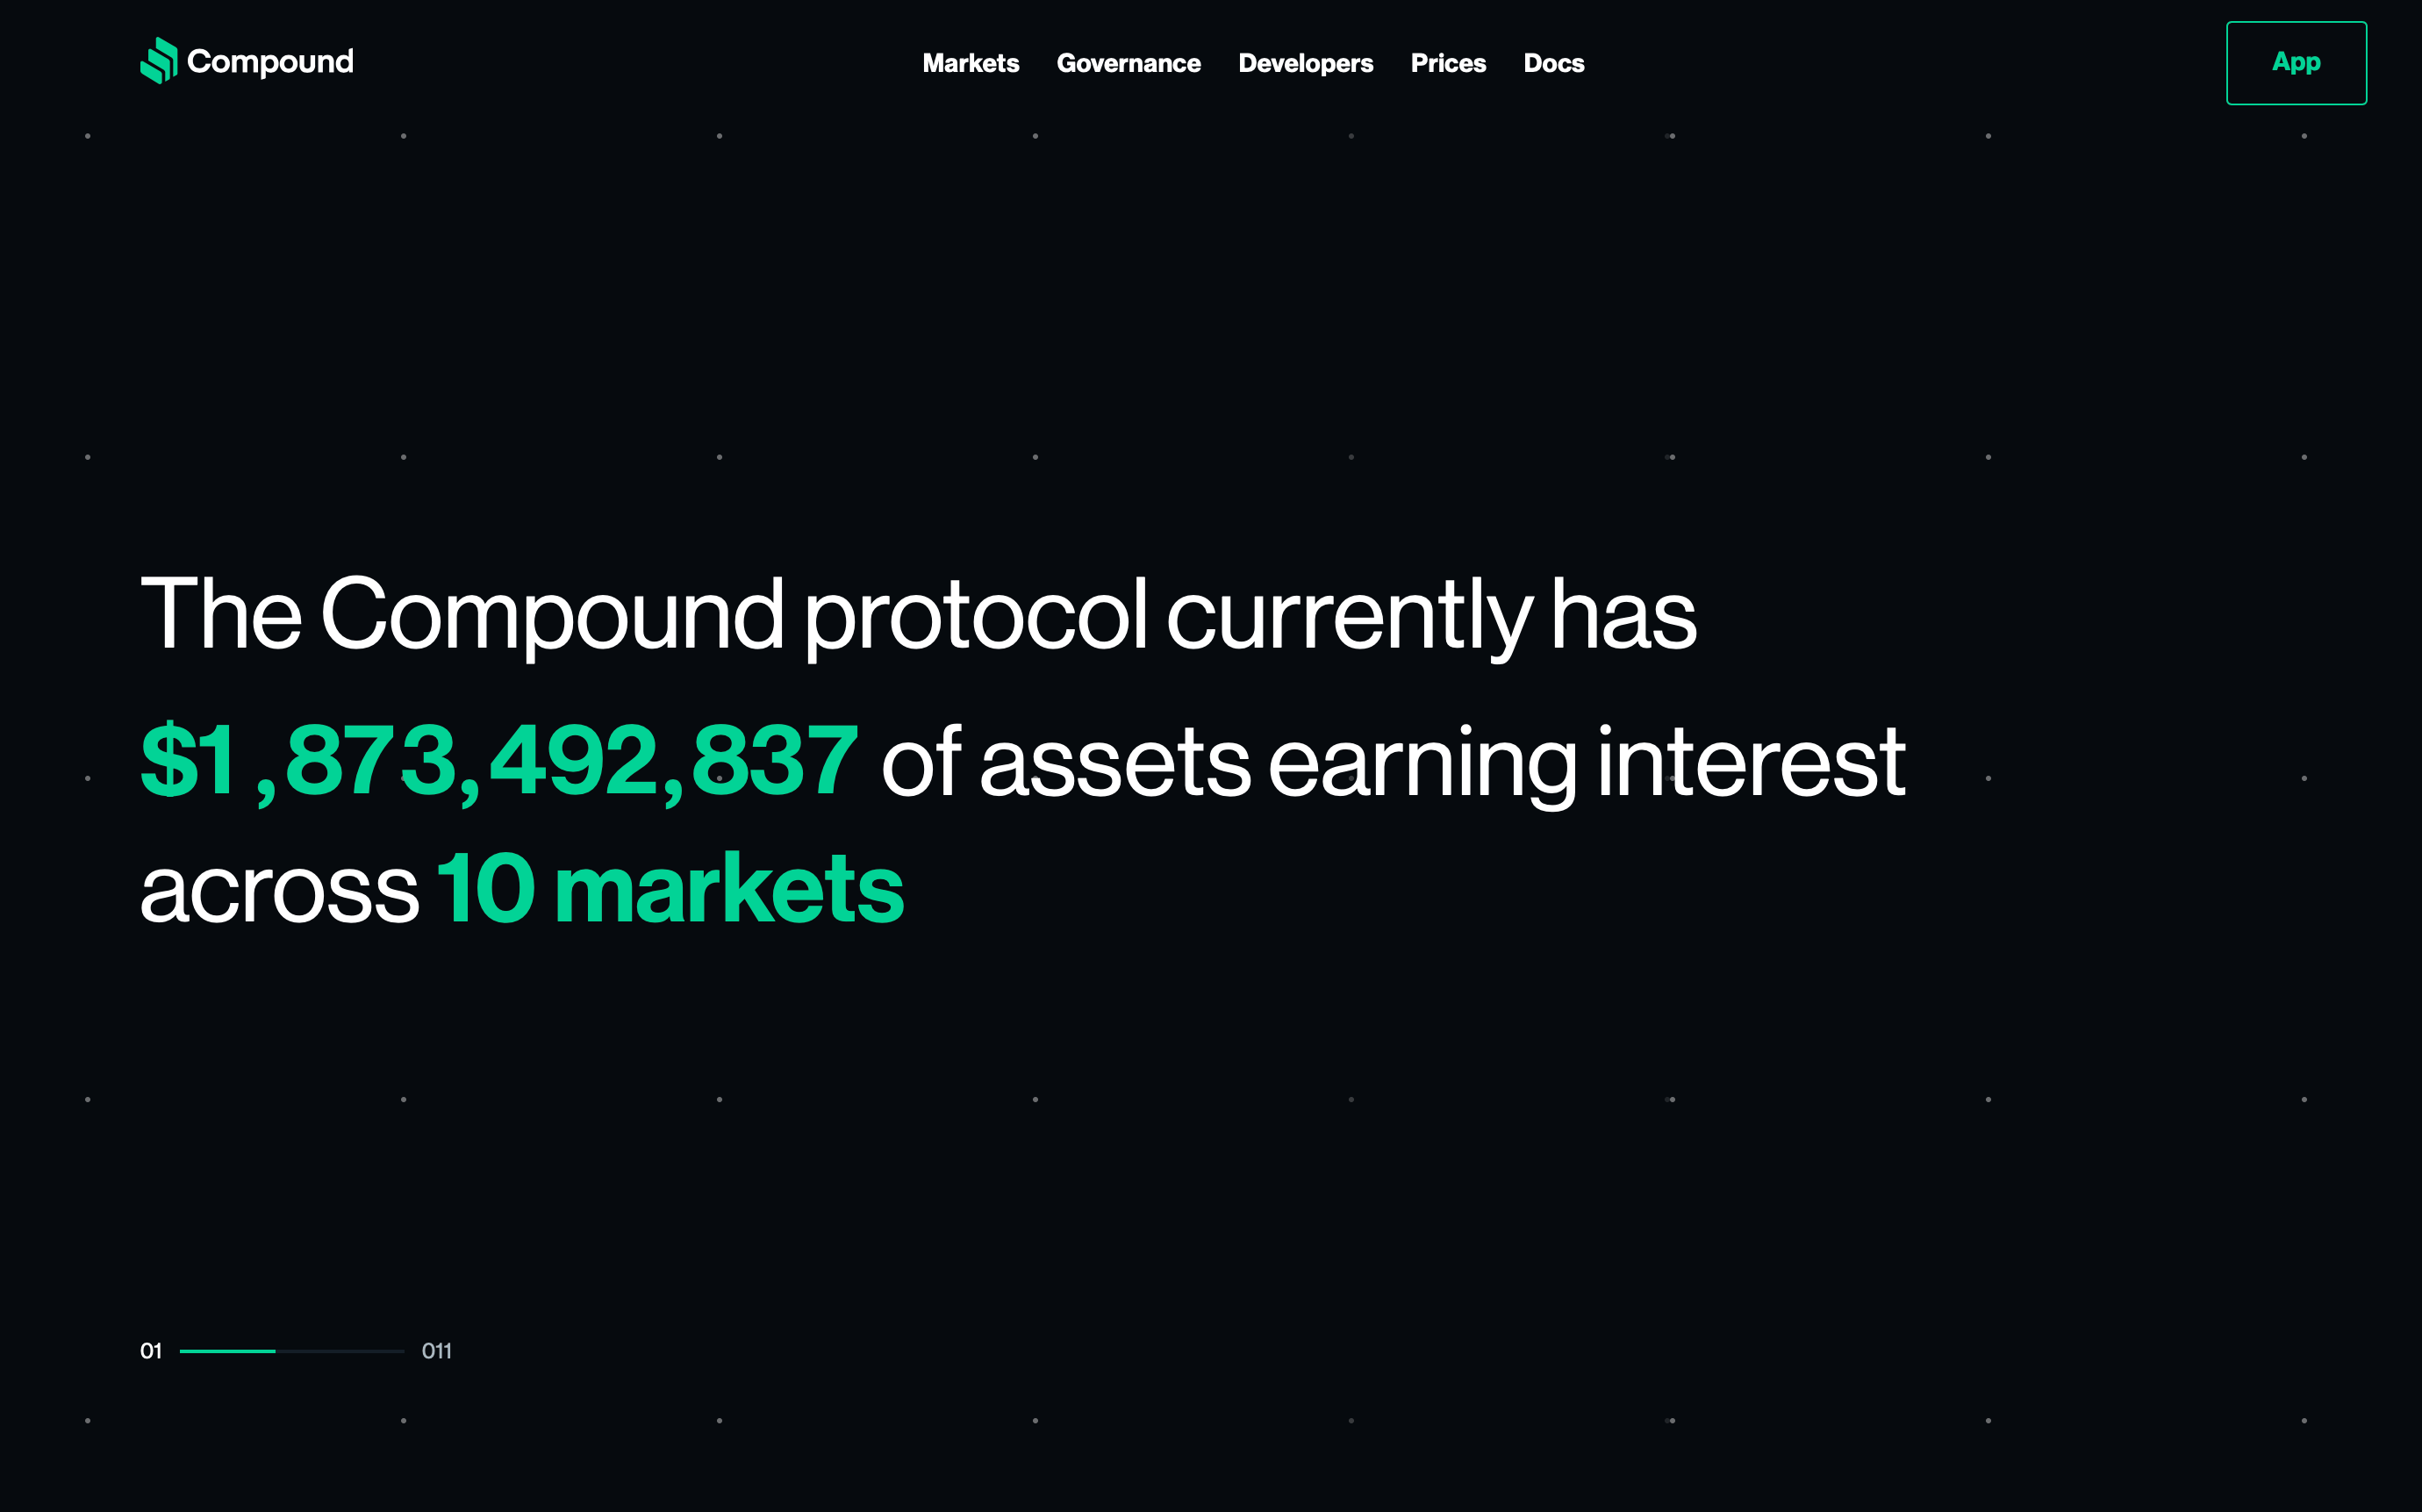 With over $33M in funding, Compound.finance is making big moves in DeFi, and they’re not alone